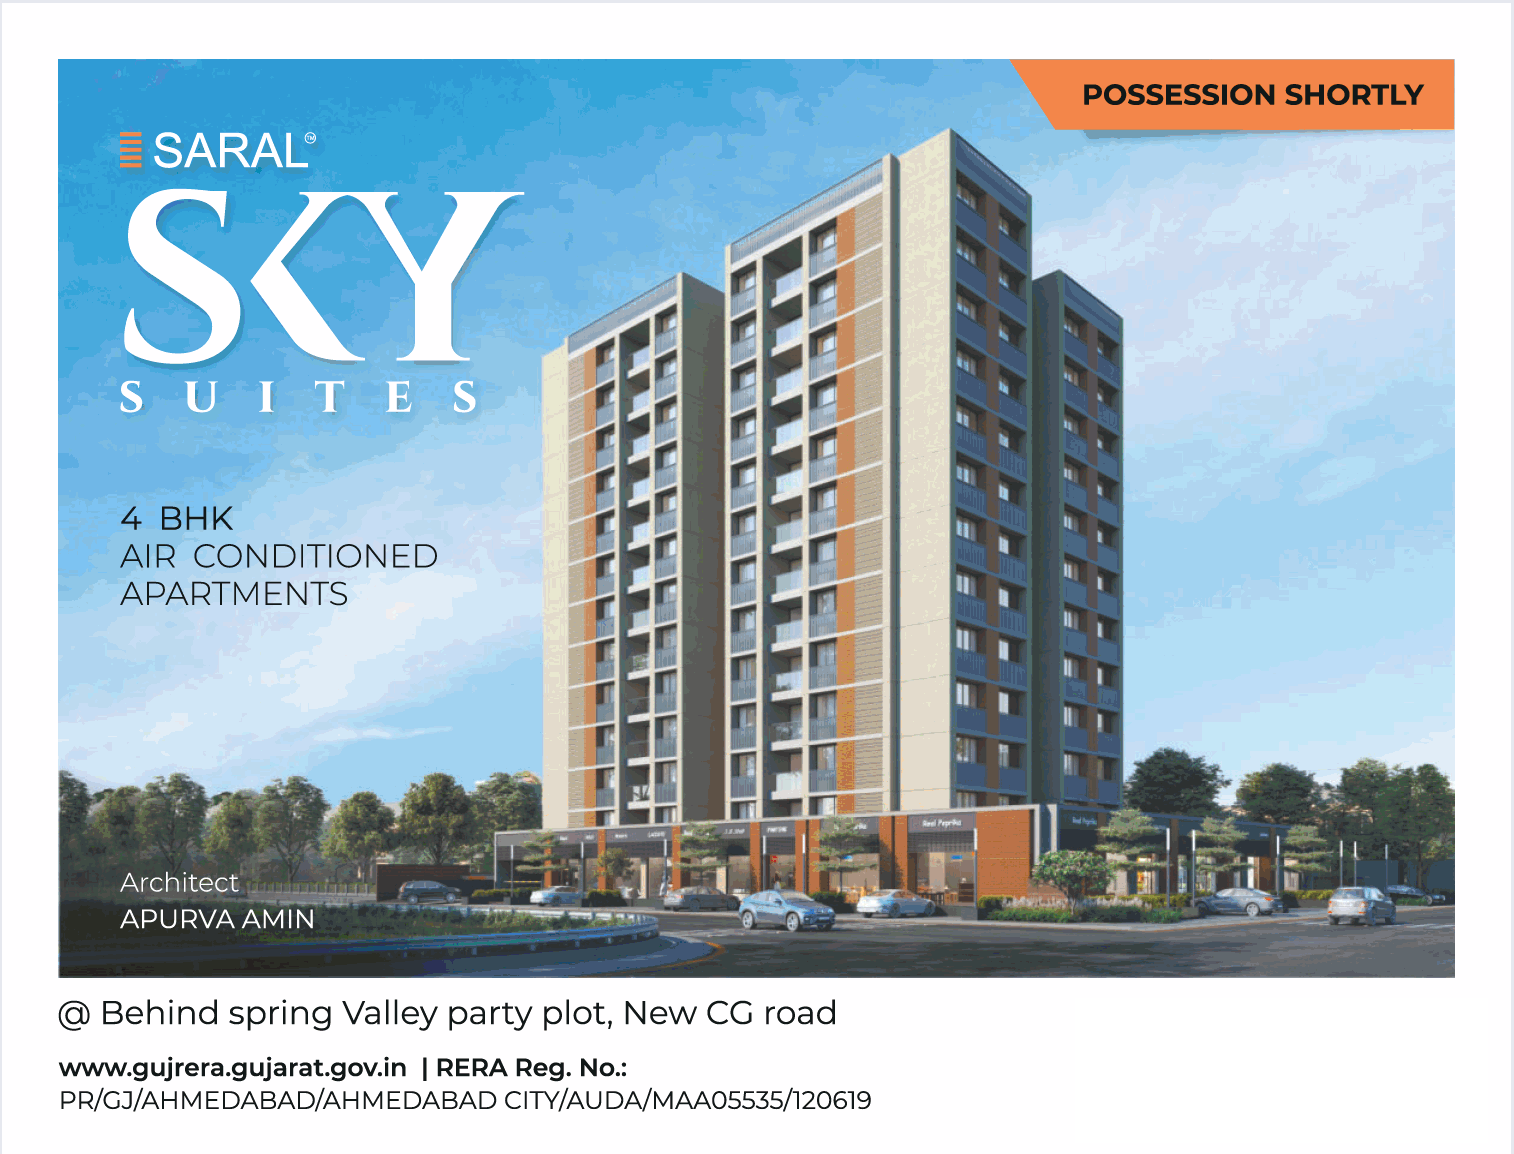 Possession shortly at Saral Sky Suites in Chandkheda, Ahmedabad Update